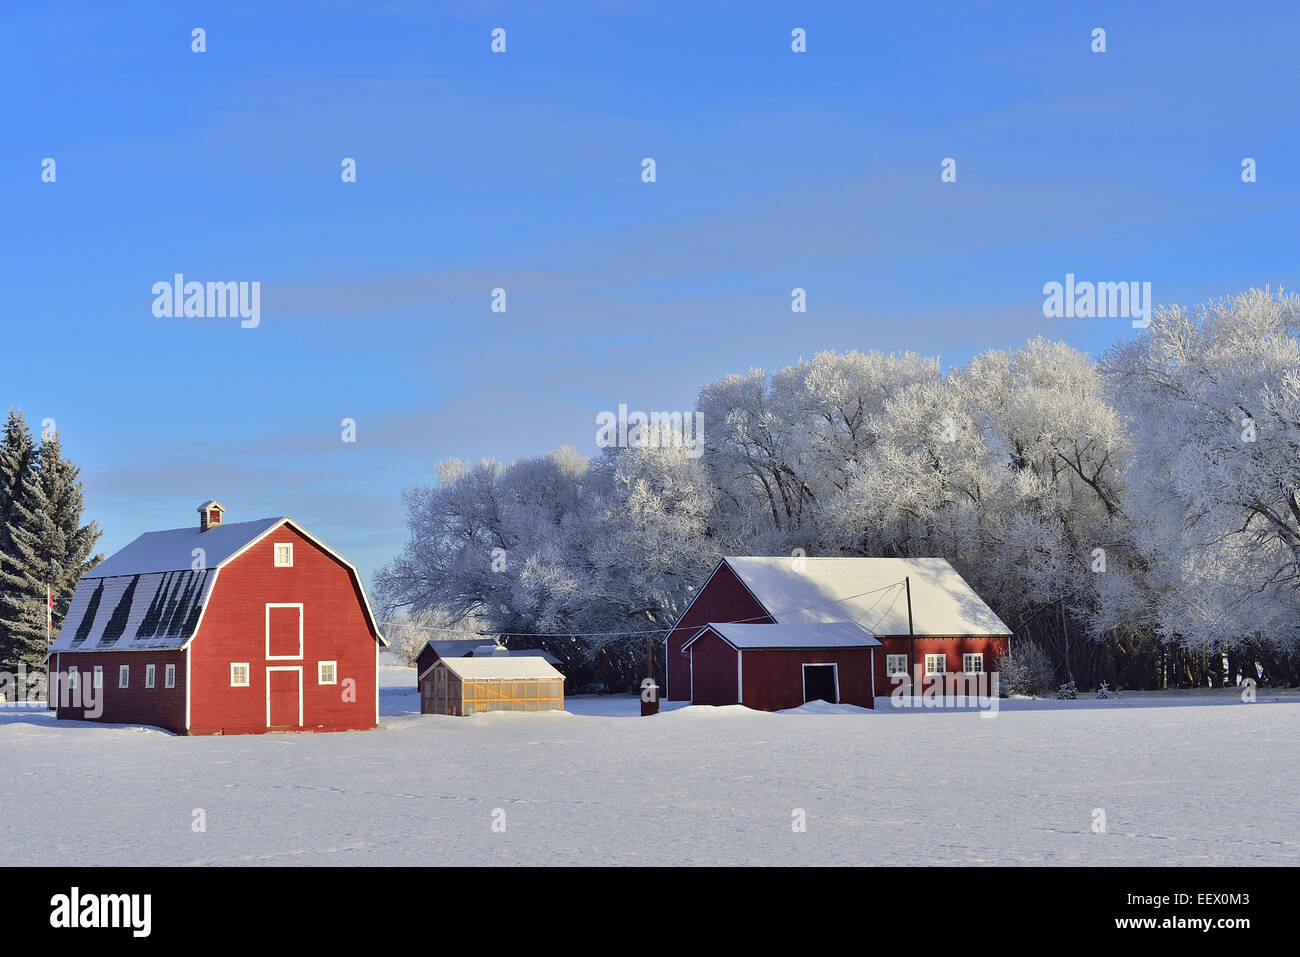 A winter landscape image of red barn and red out buildings with a blue sky and white frost Stock Photo